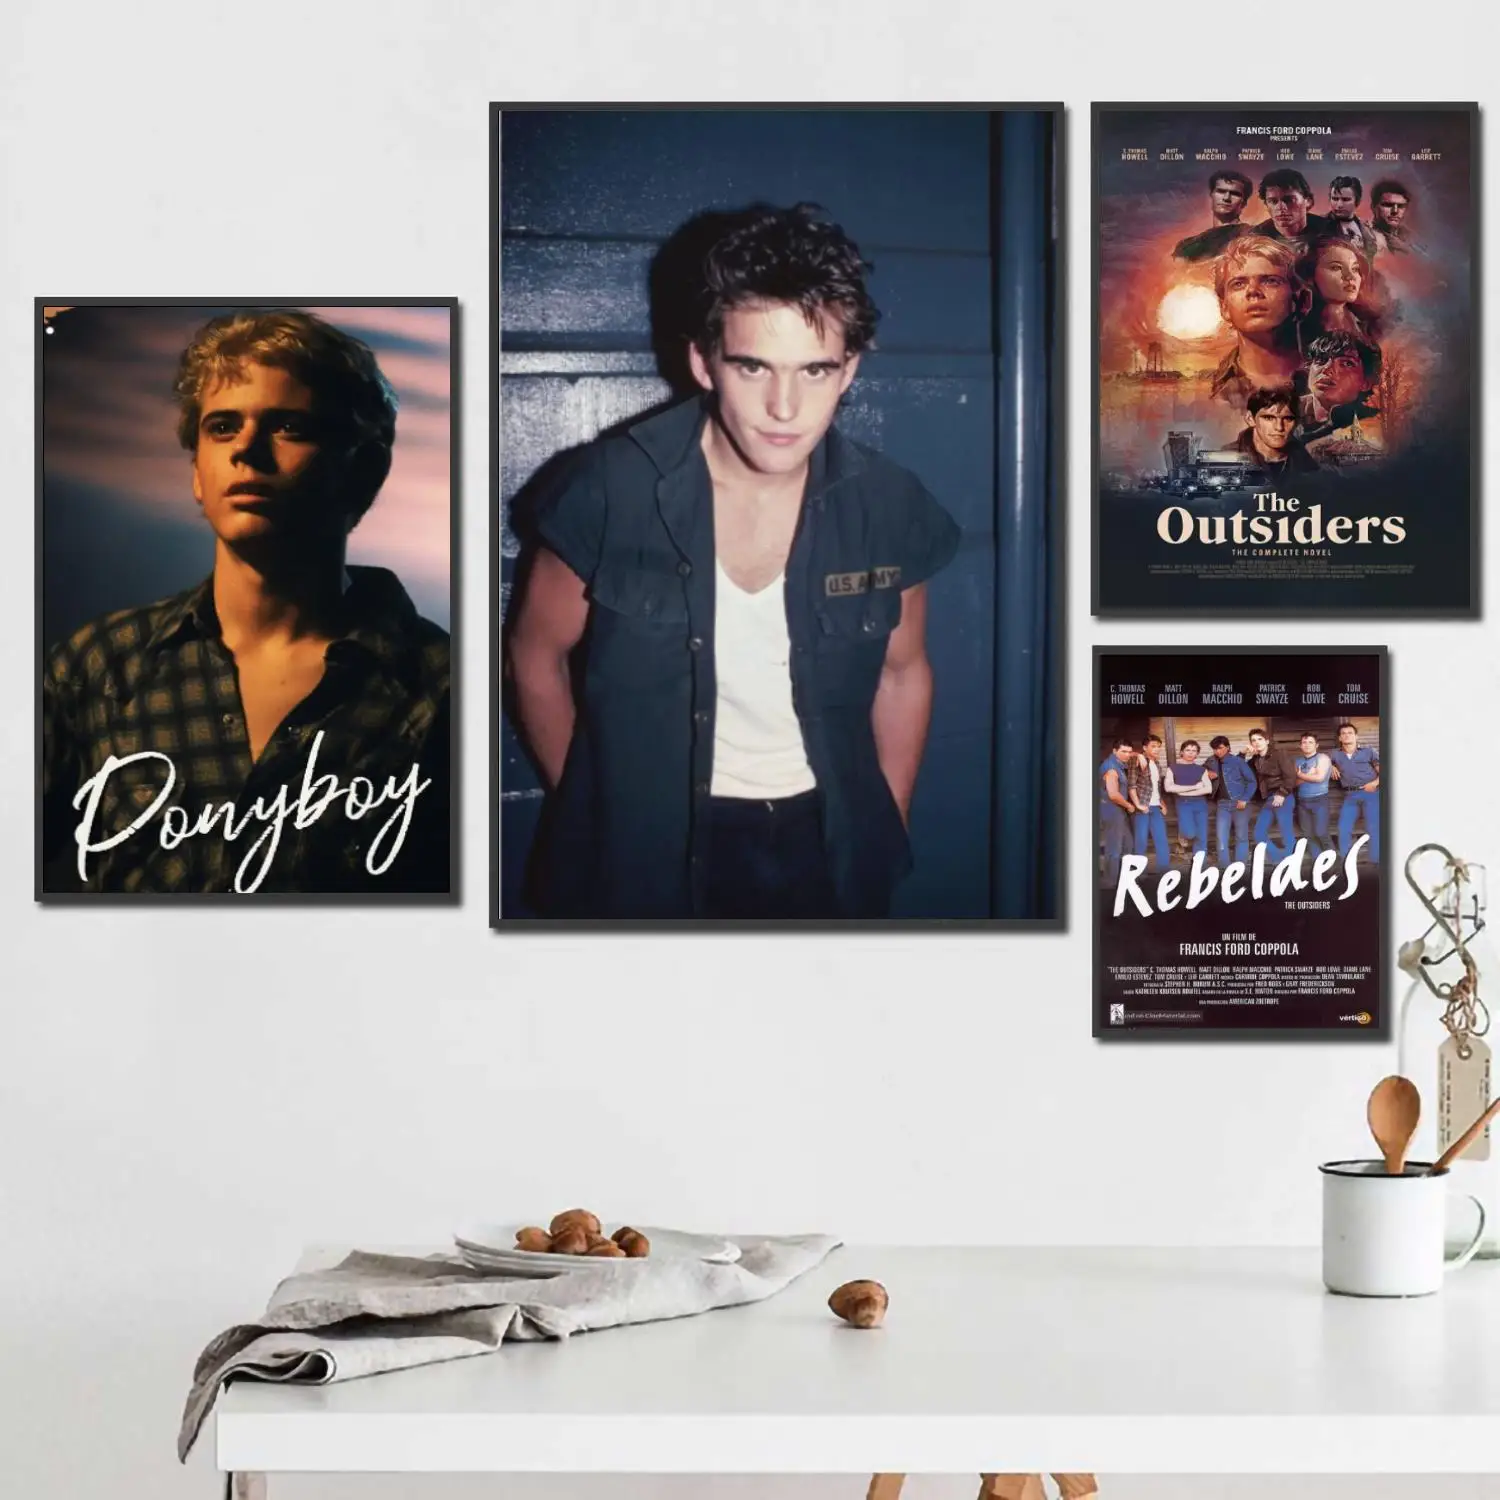 

the outsiders movie 24x36 Decorative Canvas Posters Room Bar Cafe Decor Gift Print Art Wall Paintings